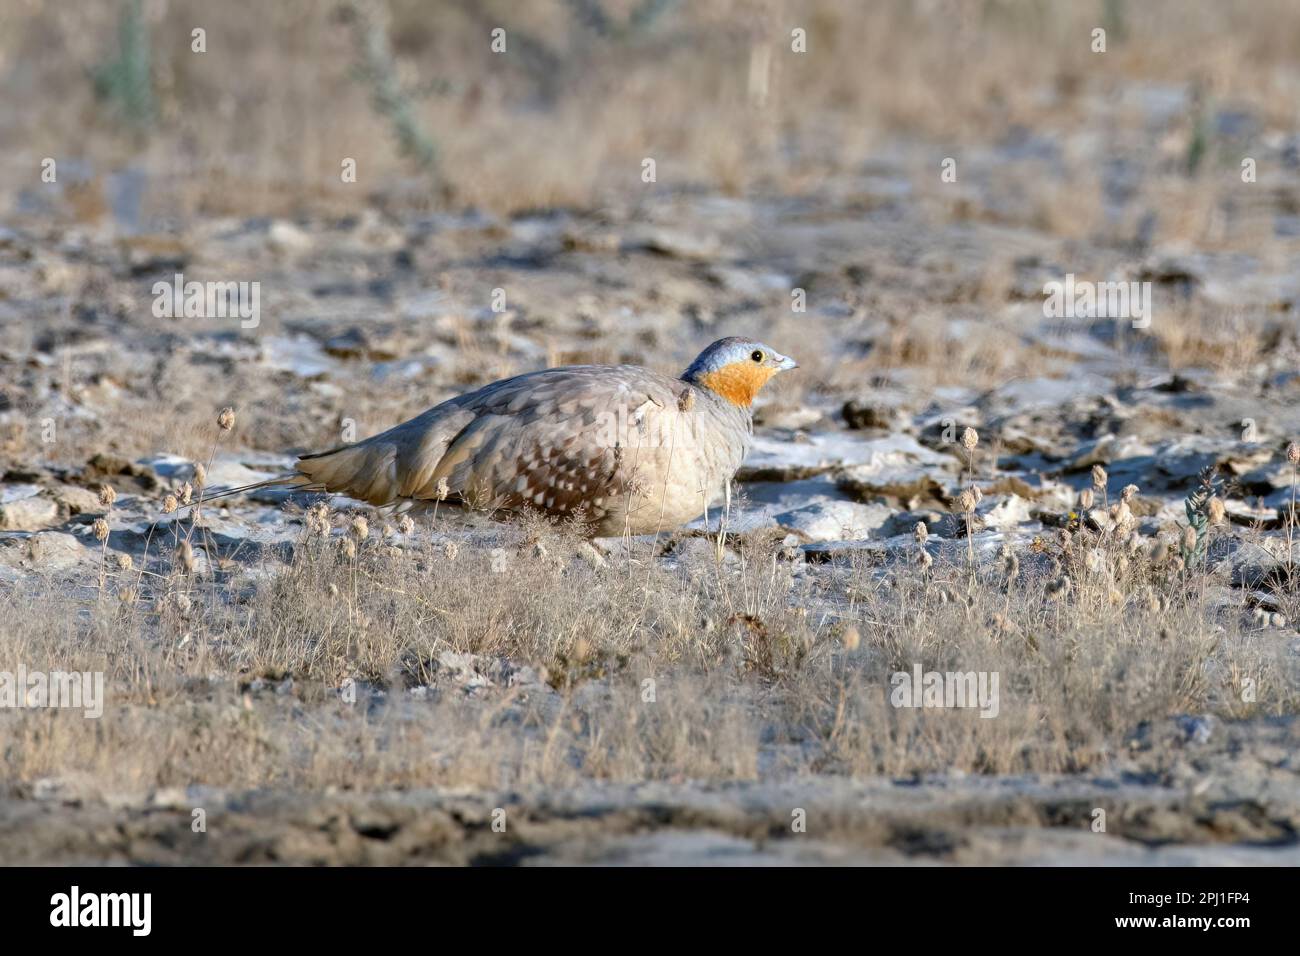 Spotted sandgrouse (Pterocles senegallus) observed in Greater Rann of Kutch in Gujarat Stock Photo